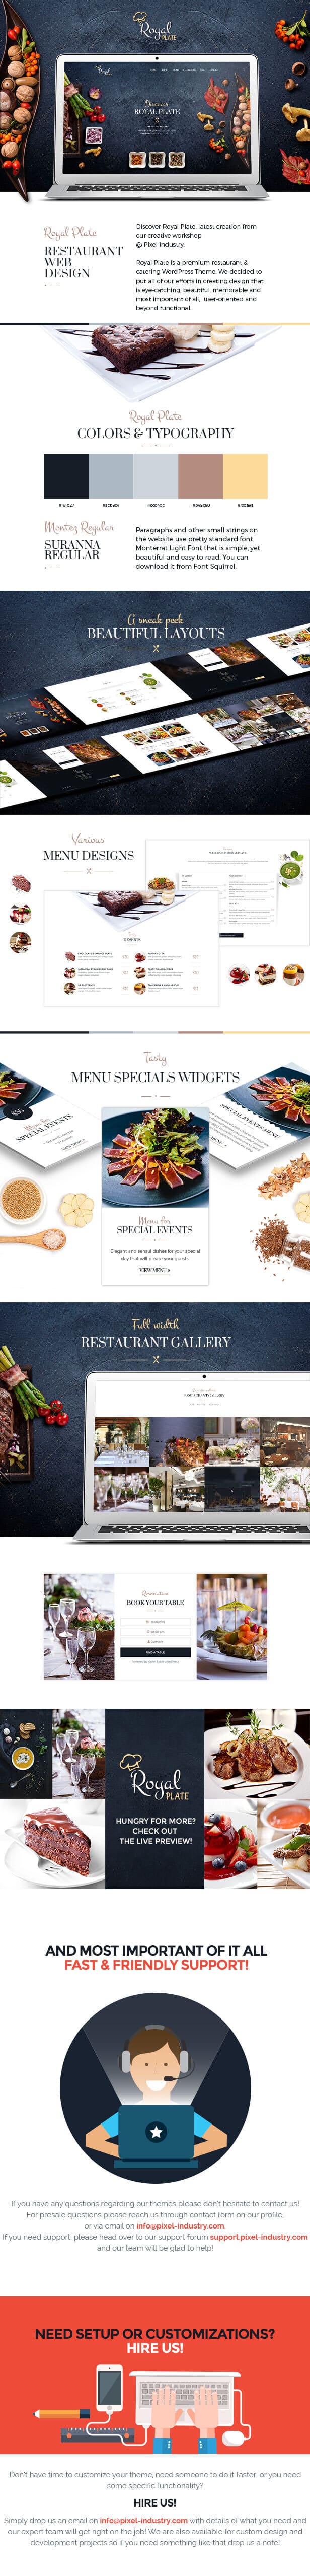 Restaurant gallery of the Royal Plate - Restaurant and Catering WordPress Theme.